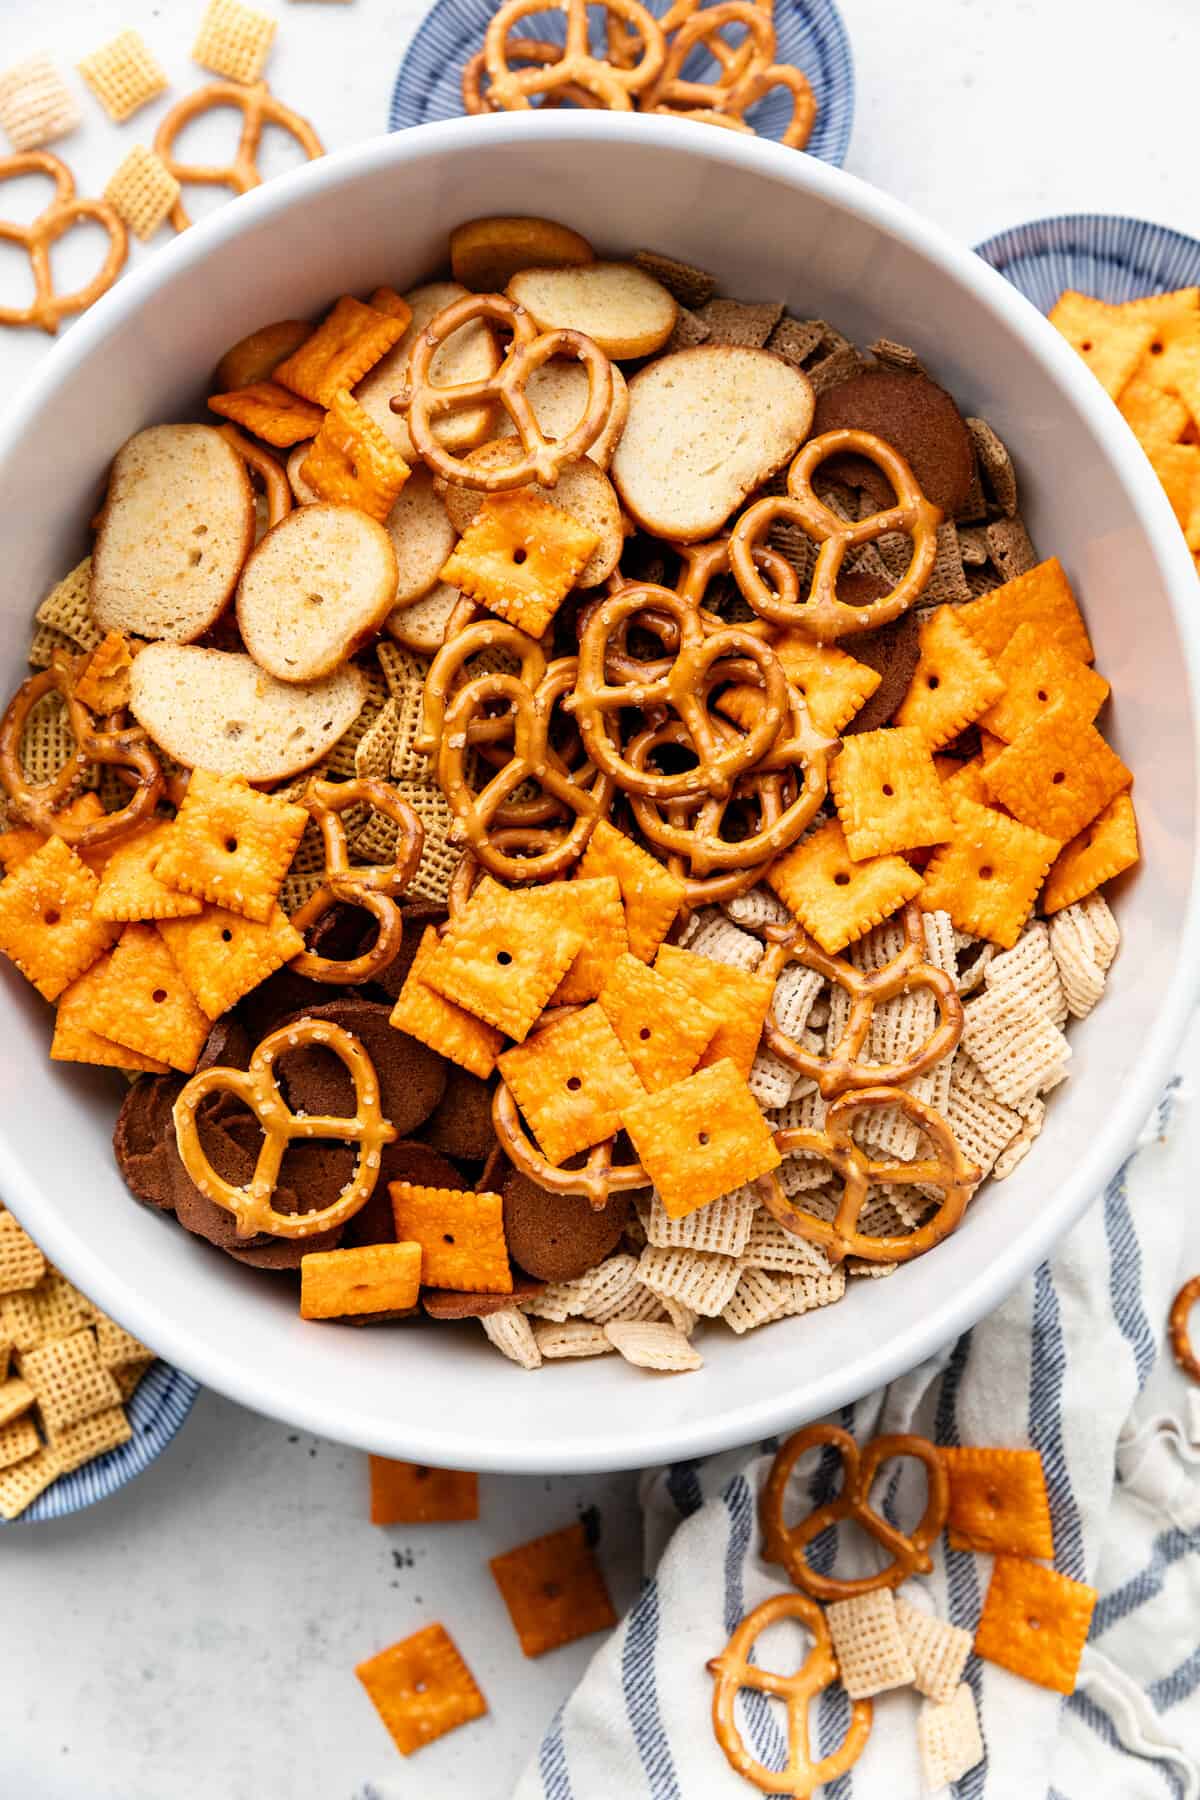 Chex mix ingredients in mixing bowl